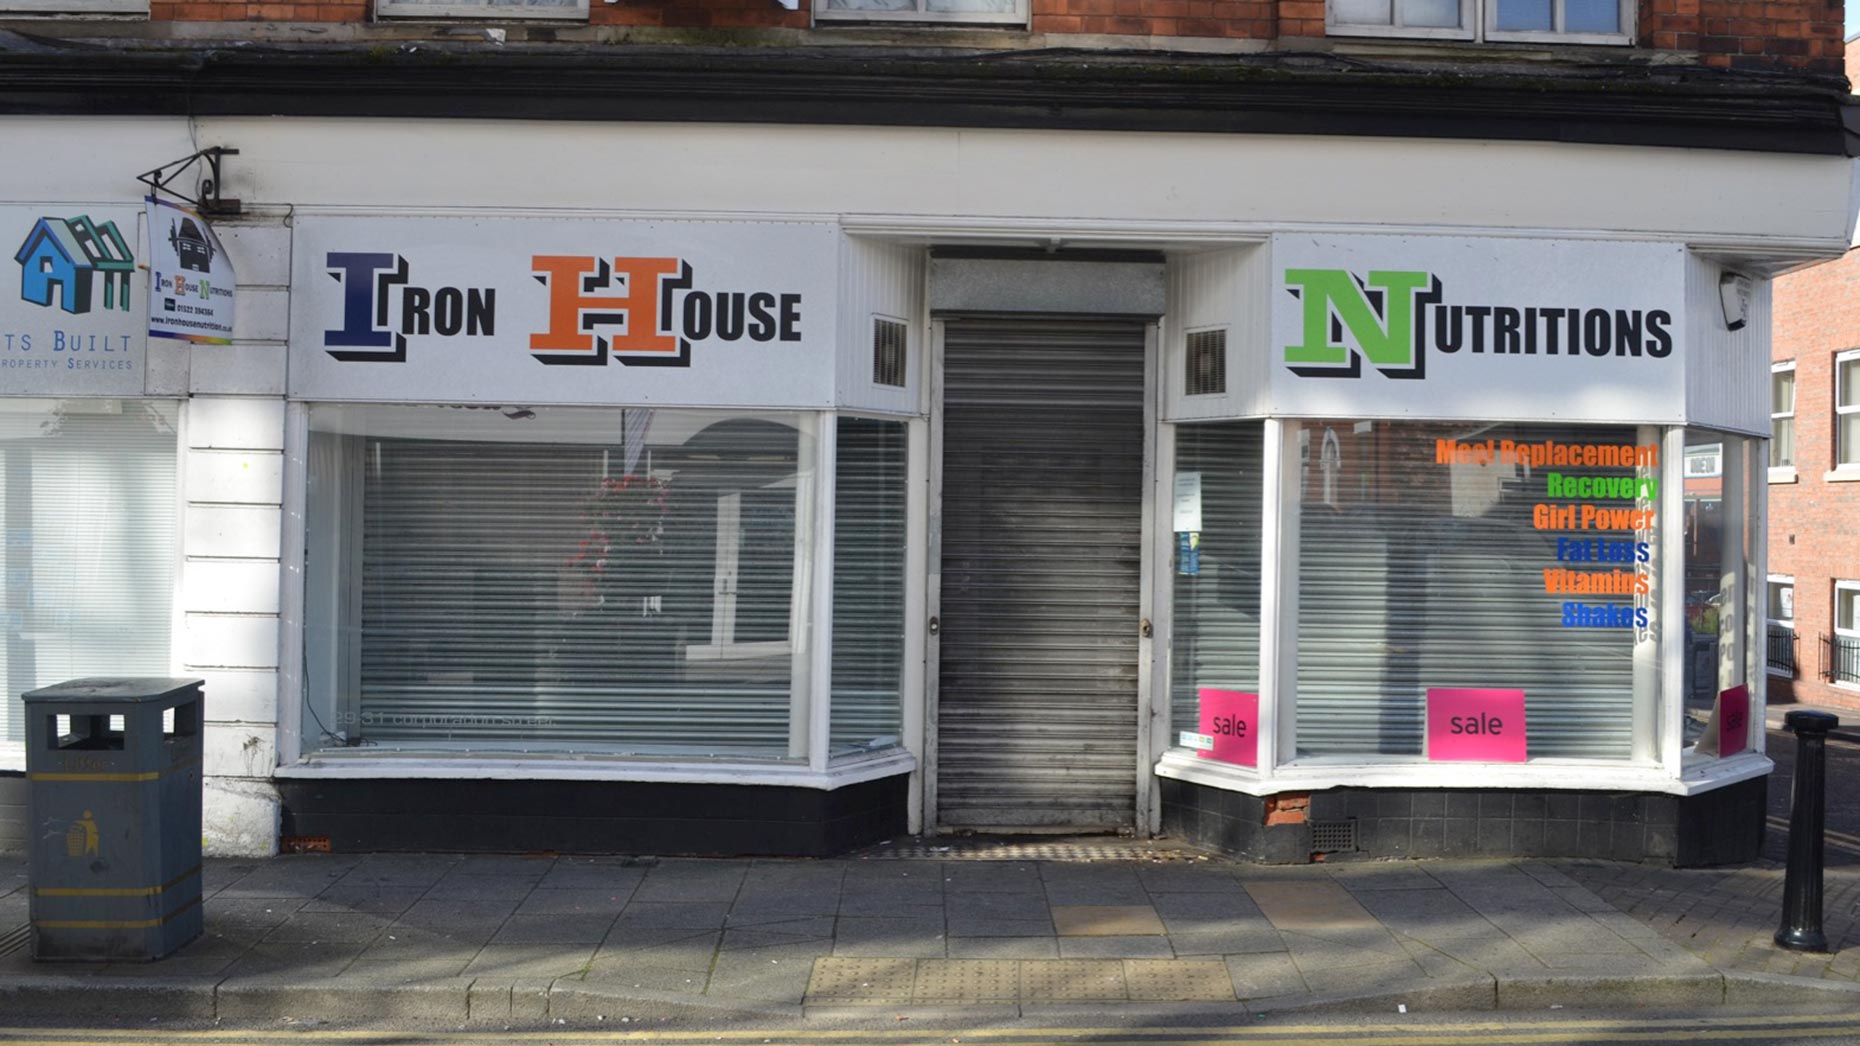 Plans for a new speakeasy have been submitted for the former Iron House Nutrition on Corporation Street, Lincoln. Photo: Sarah Harrison-Barker for The Lincolnite